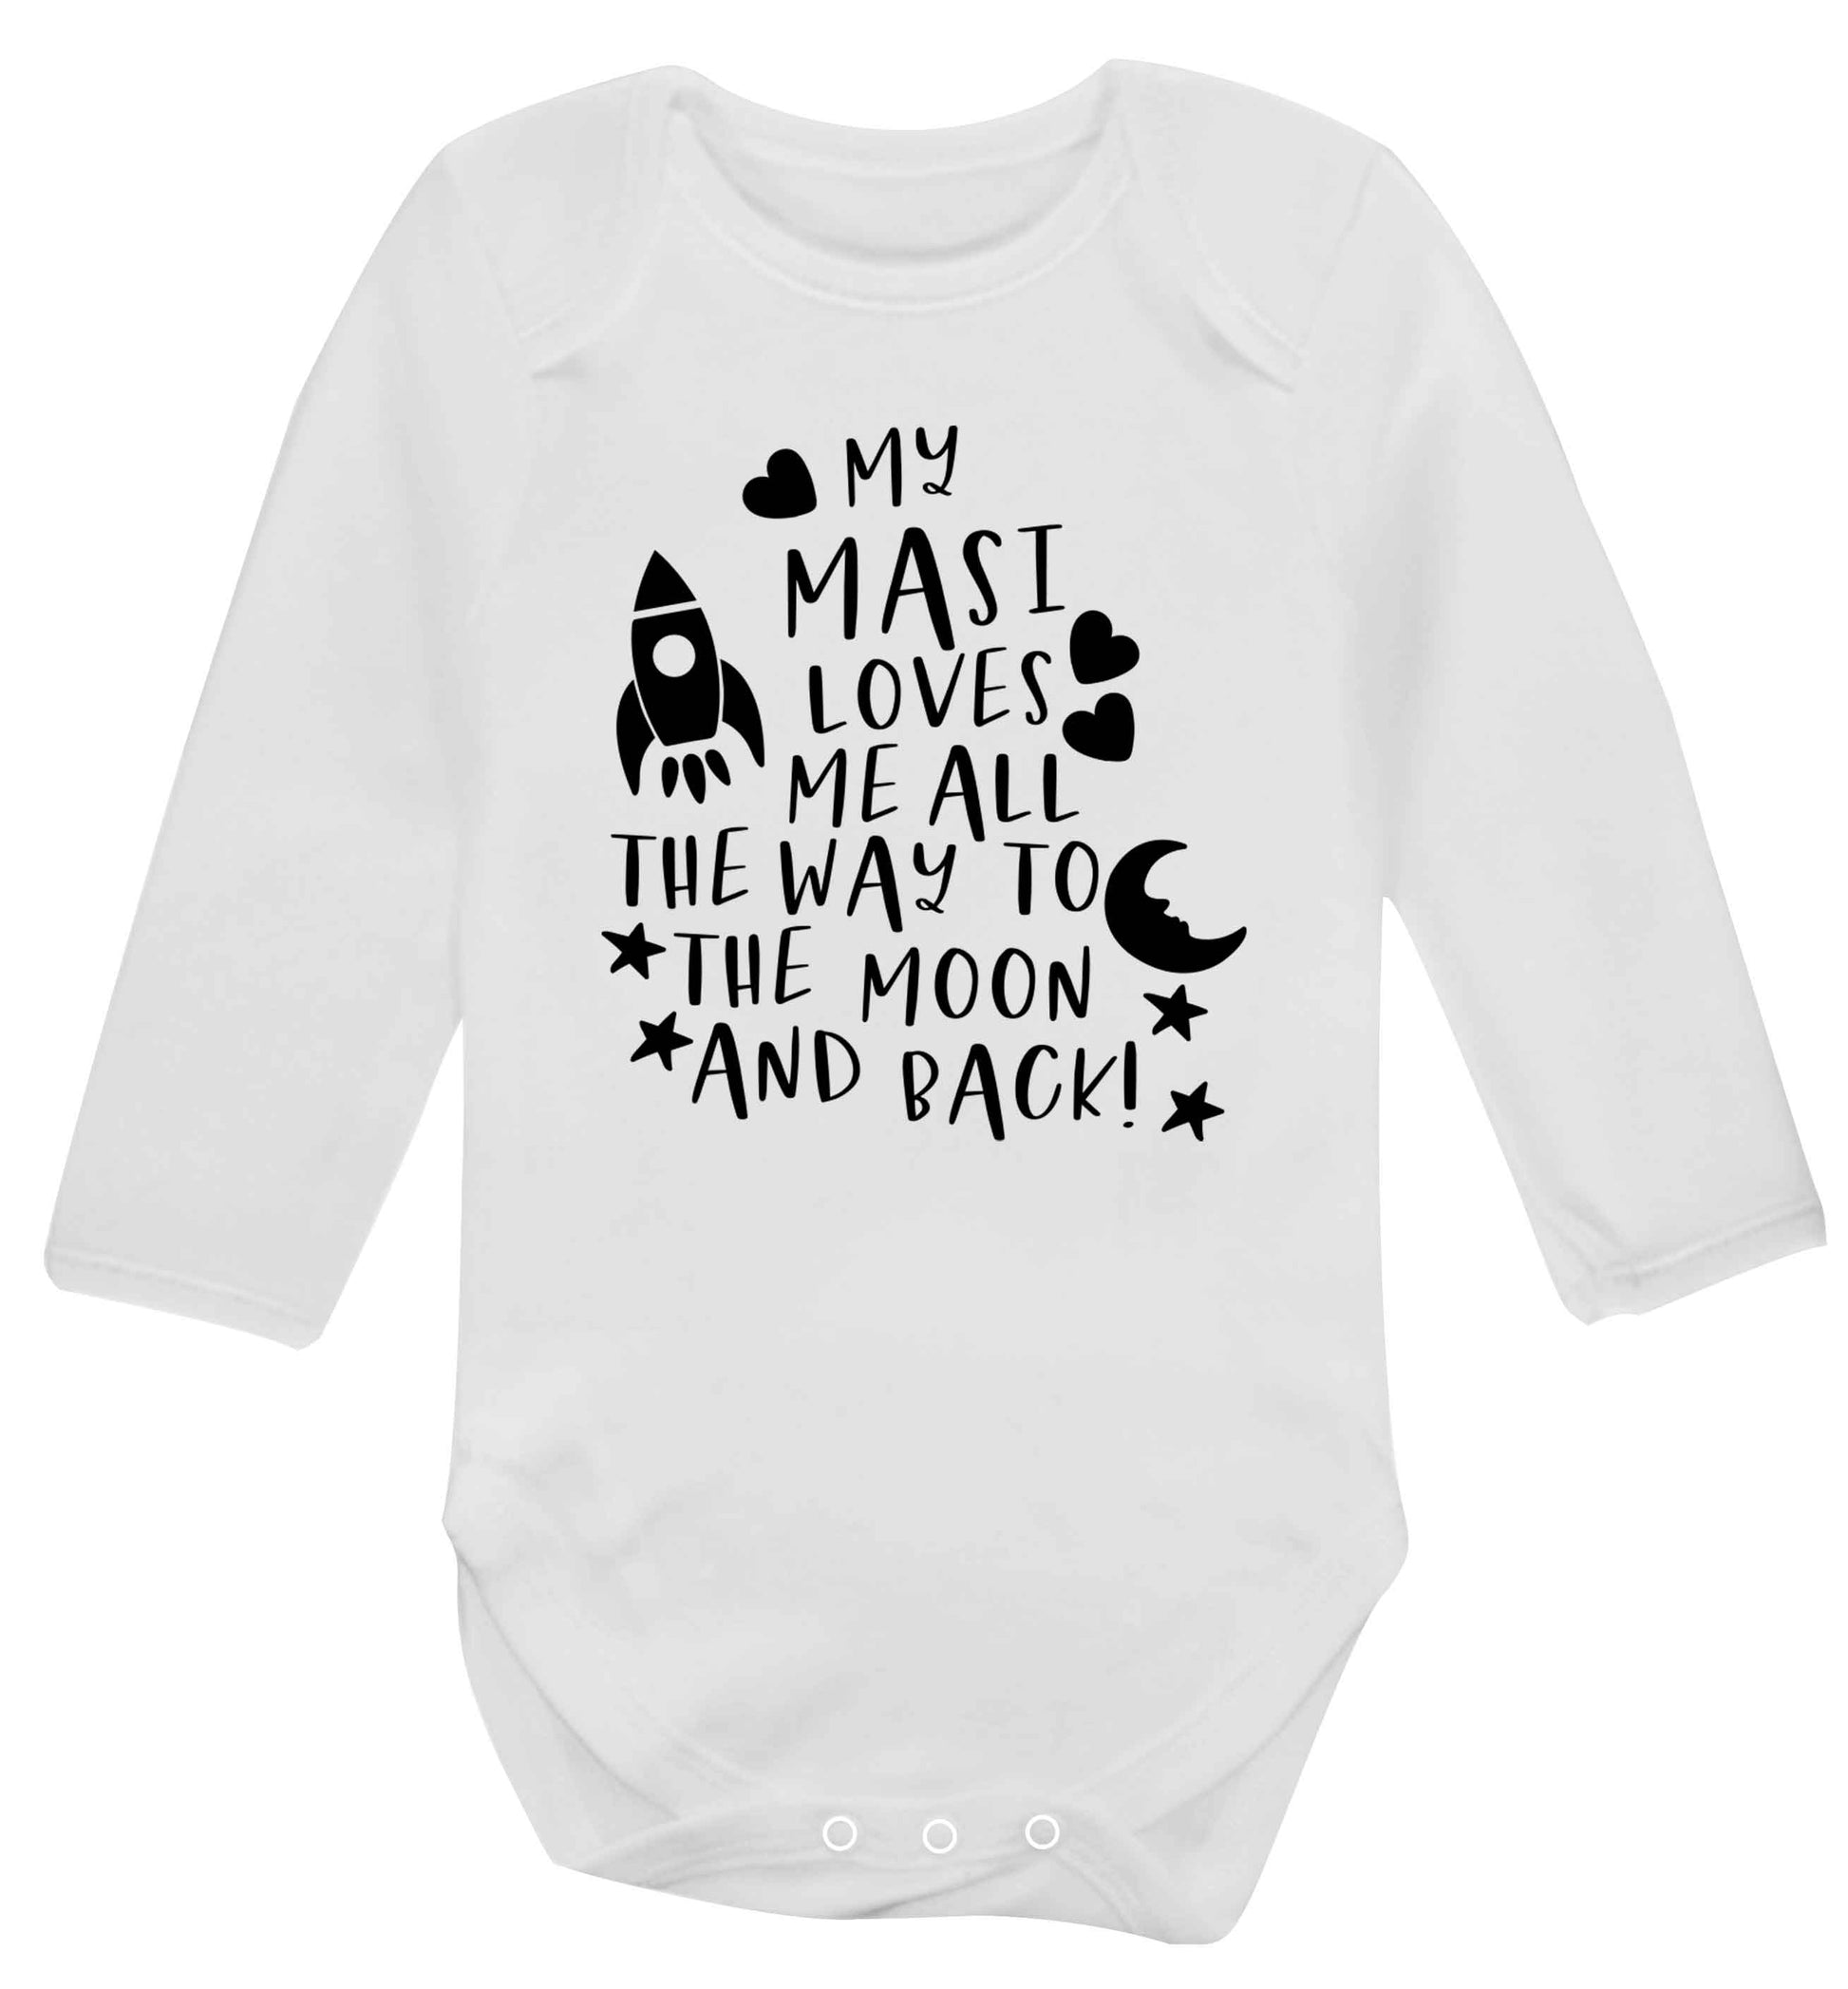 My masi loves me all the way to the moon and back Baby Vest long sleeved white 6-12 months